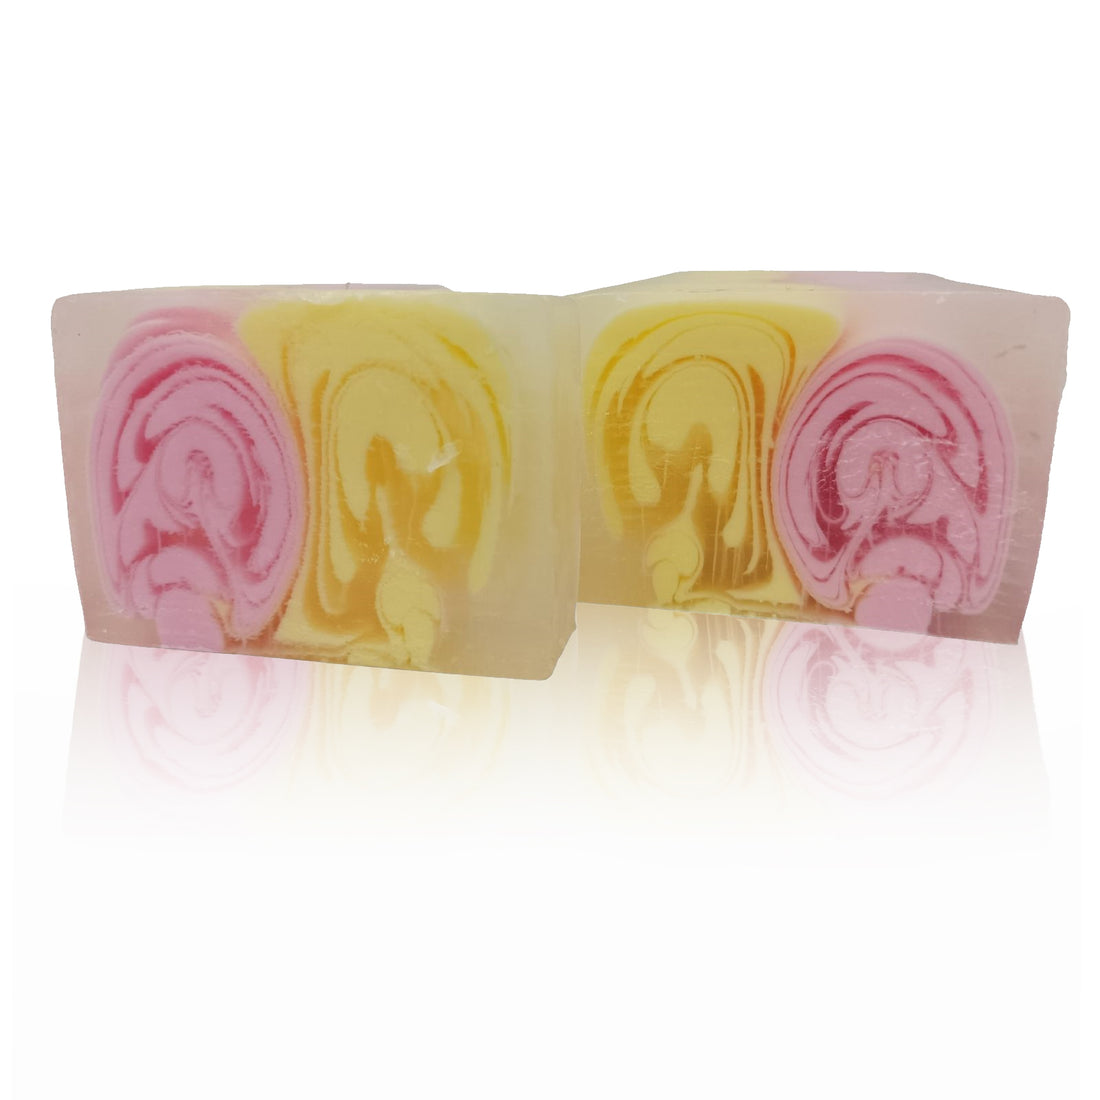 Hand-crafted Soap - Magnolia - Slice 100g